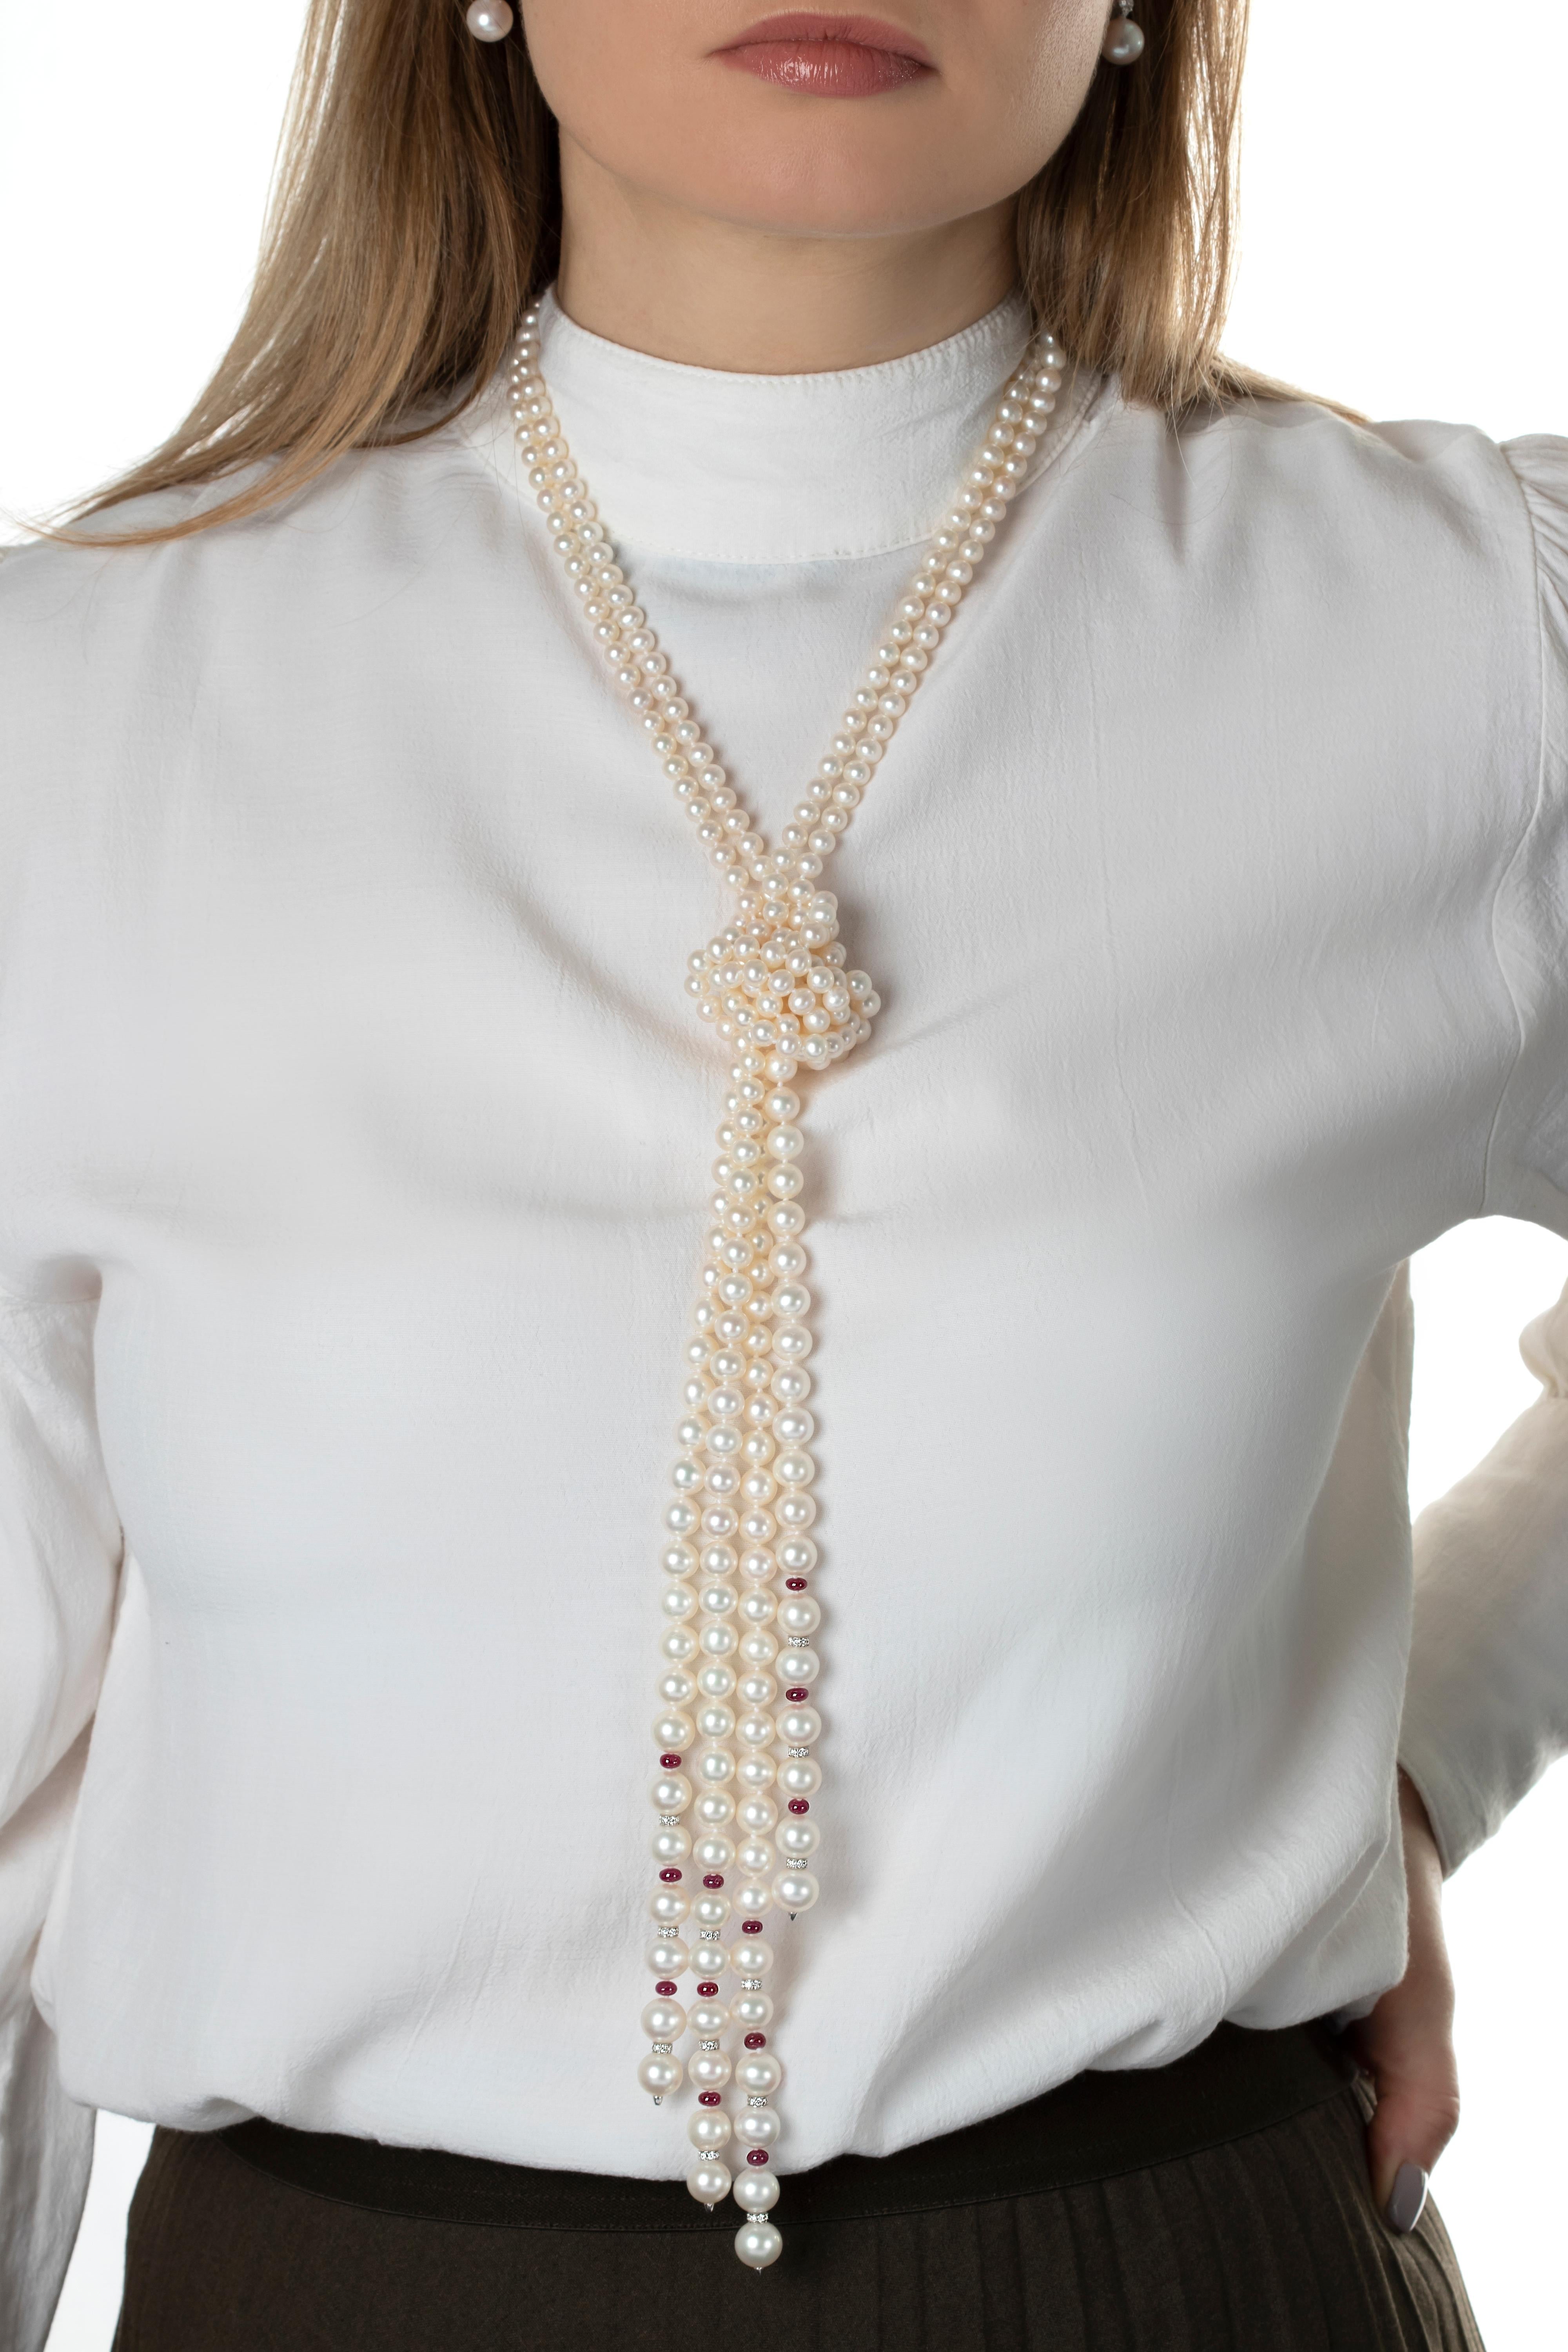 The timeless combination of Ruby, Diamond and Pearl has been re-imagined by Yoko London in this unique necklace. Featuring two separate lengths of Freshwater pearls which have been interspersed with Diamond and Ruby rondelles through the ends. The